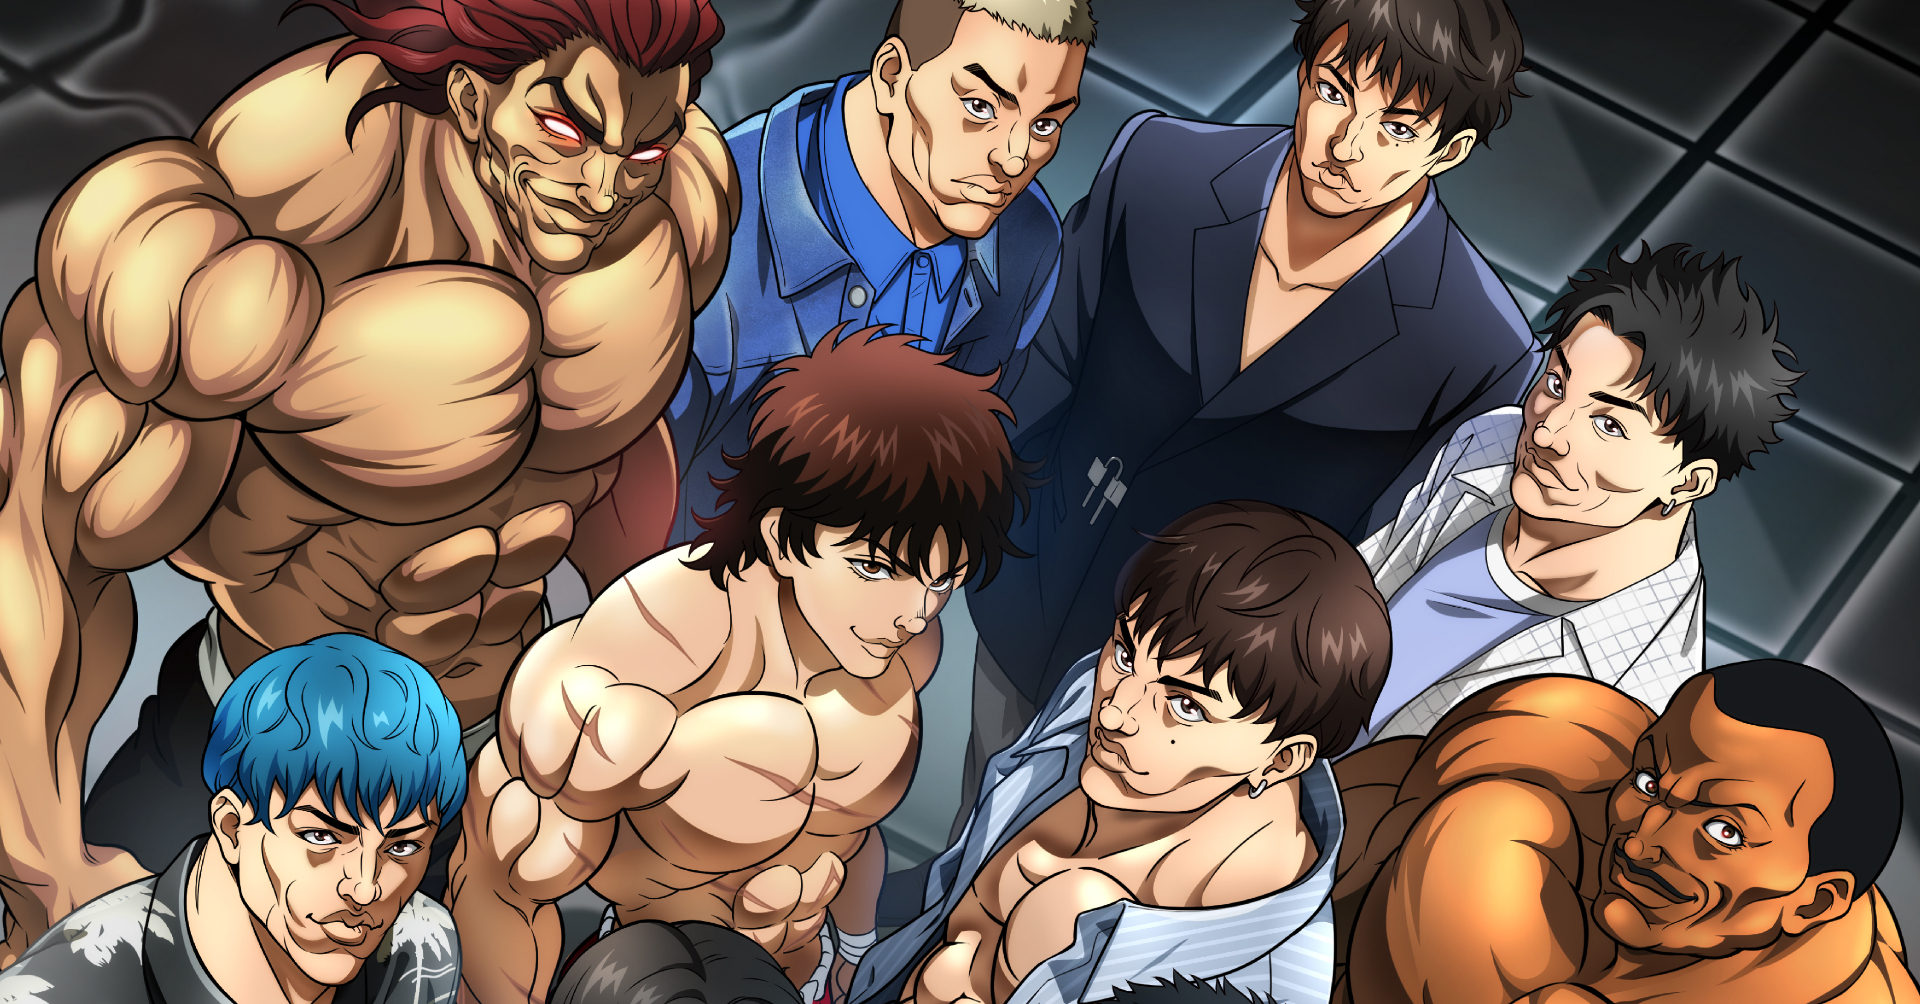 Baki Hanma Ending Theme "Unchained World" Music Video by GENERATIONS  Released - Anime Corner